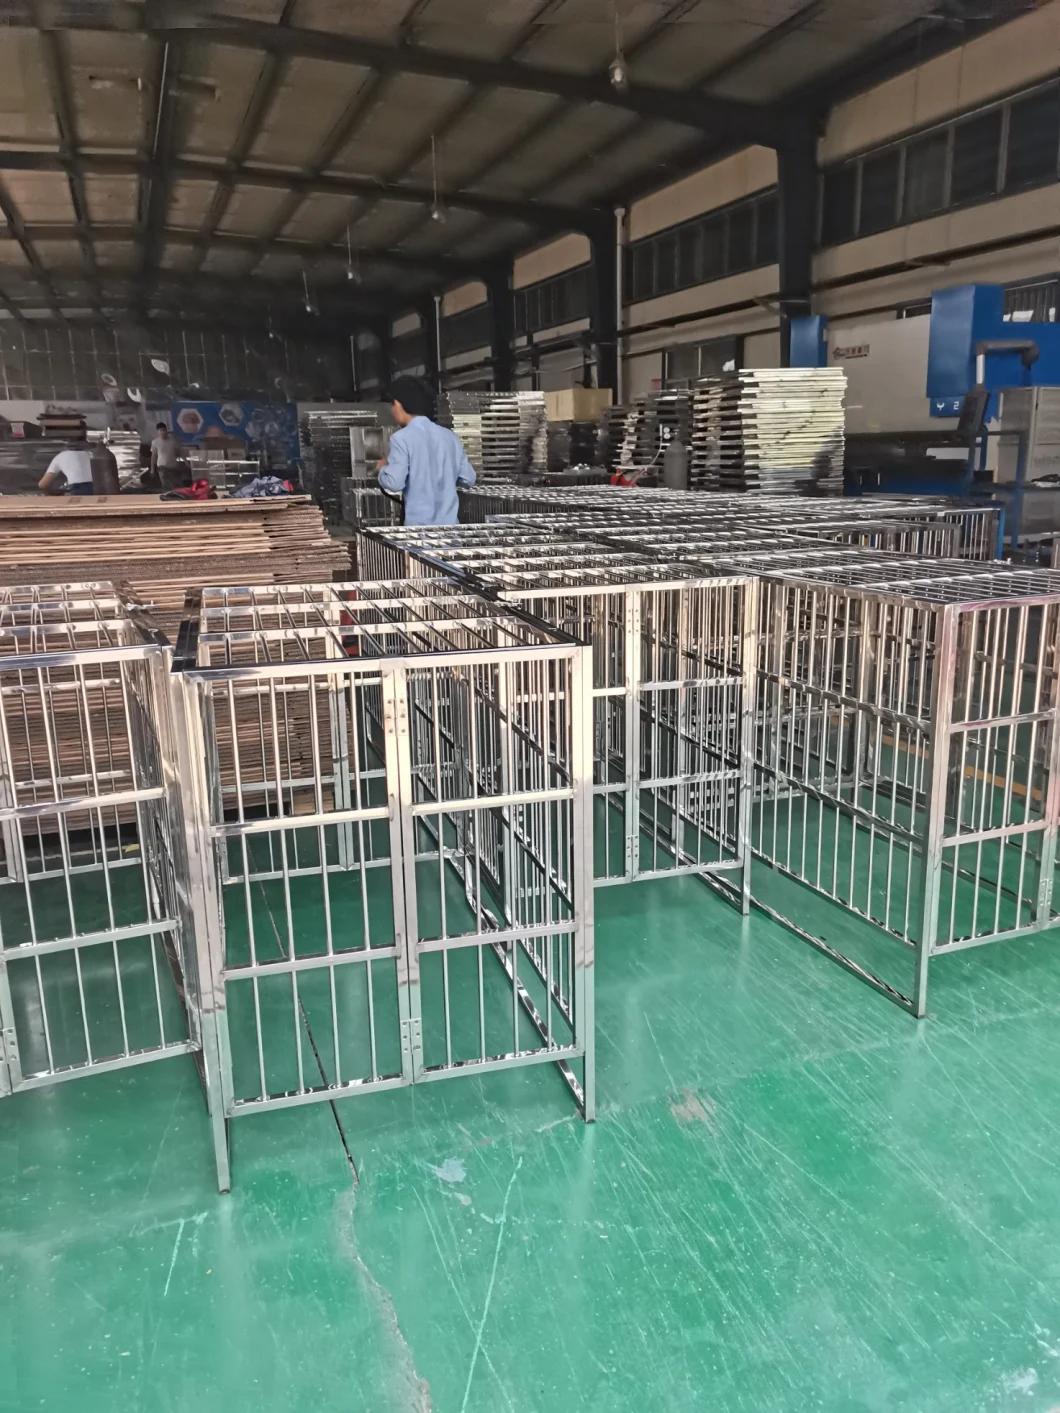 Mt Medical Large Stainless Steel Dog Cage for Vet Clinic